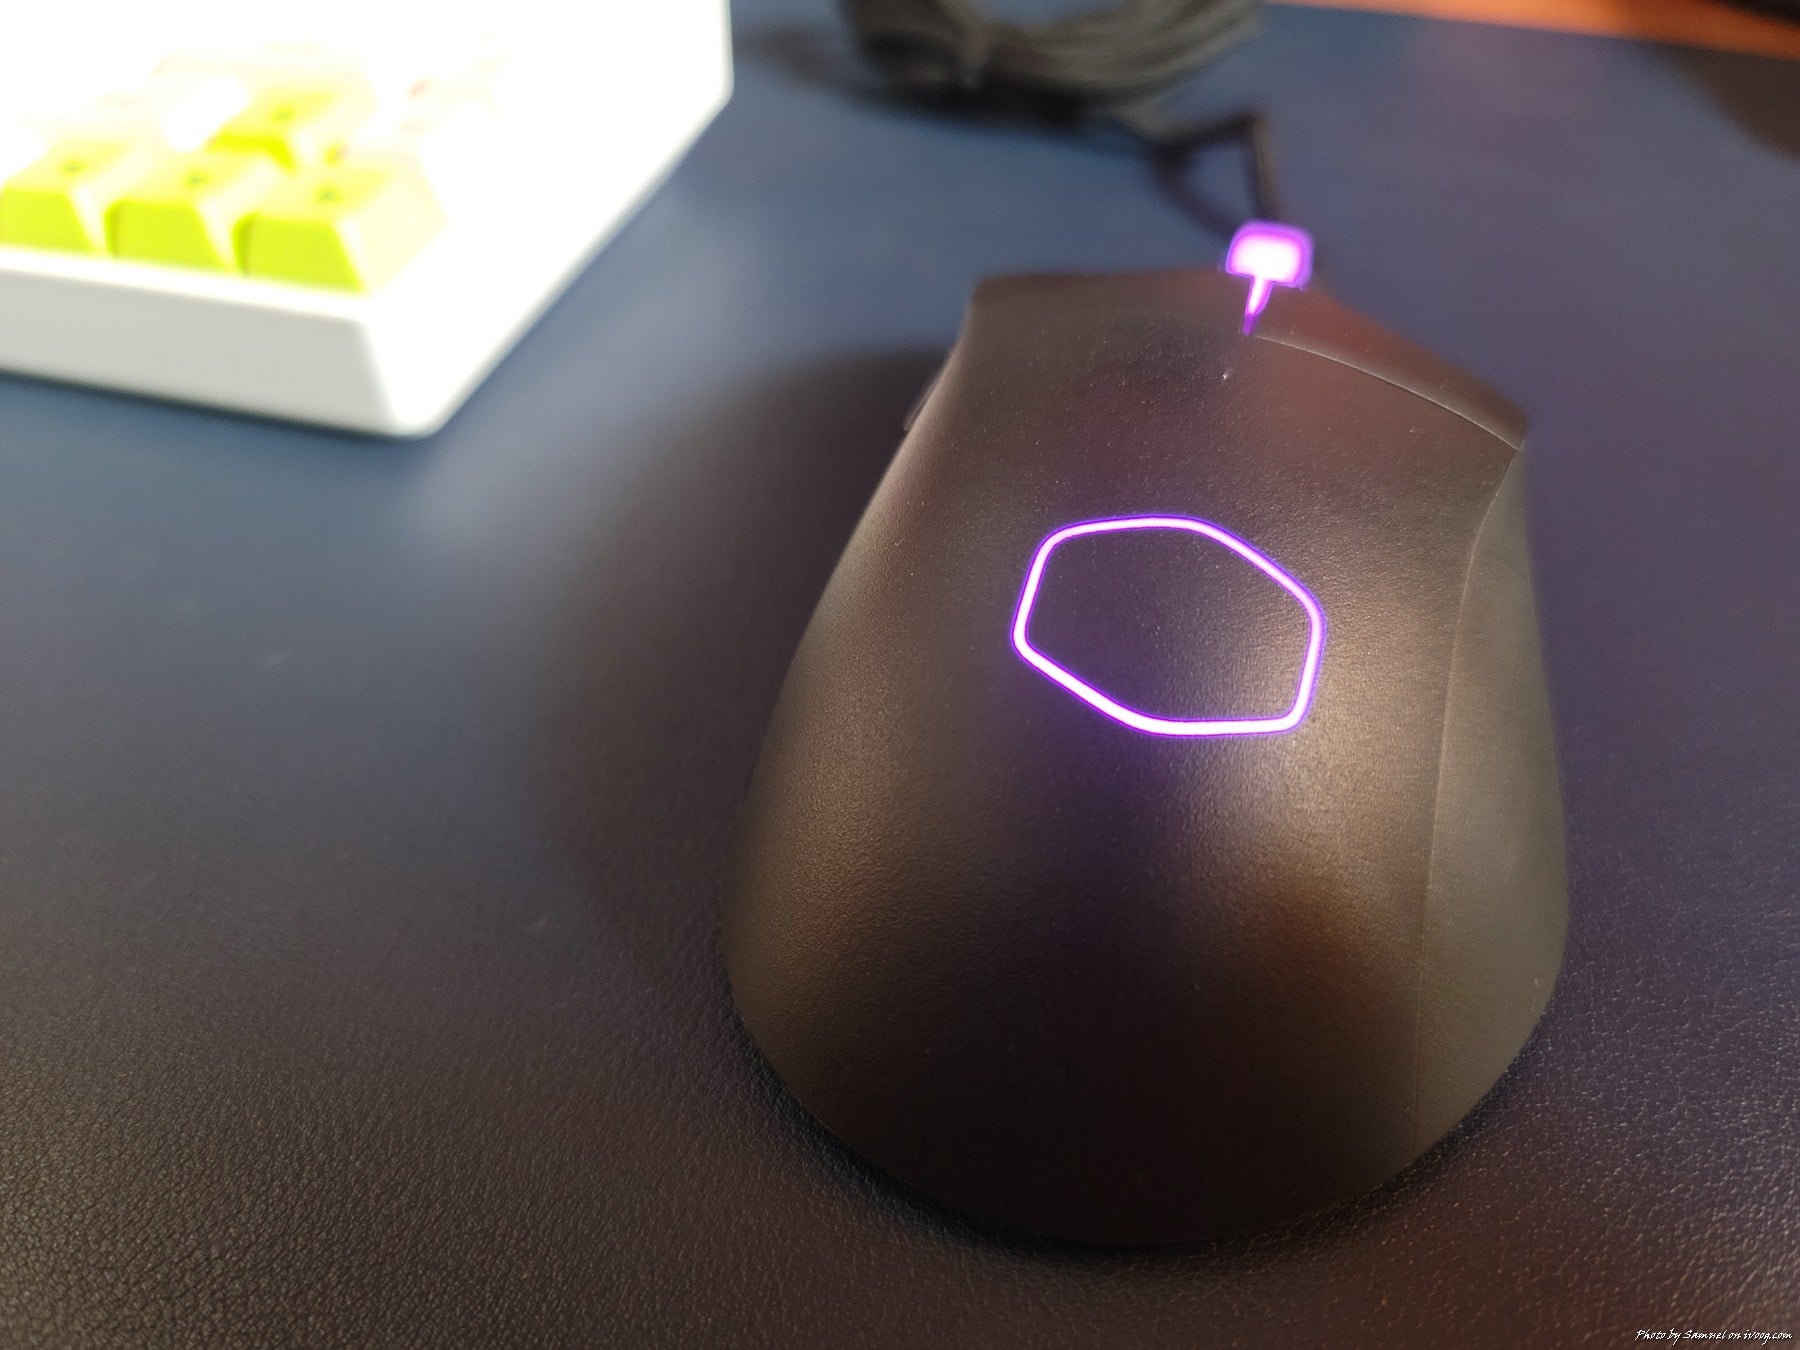 Cooler Master Mm730 Gaming Mouse 06